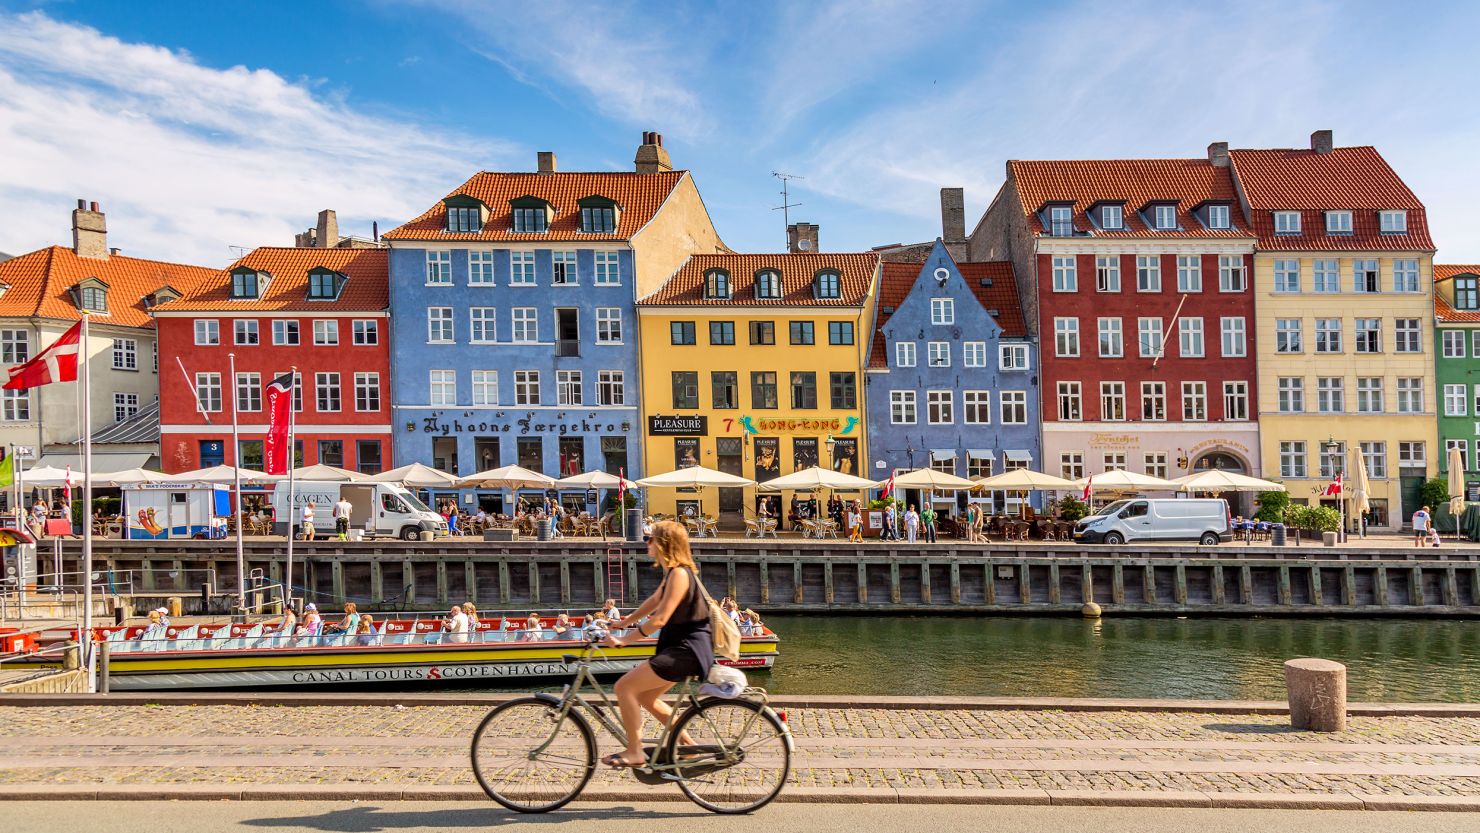 Want to see Copenhagen quickly but personally? Grab a bike and go.